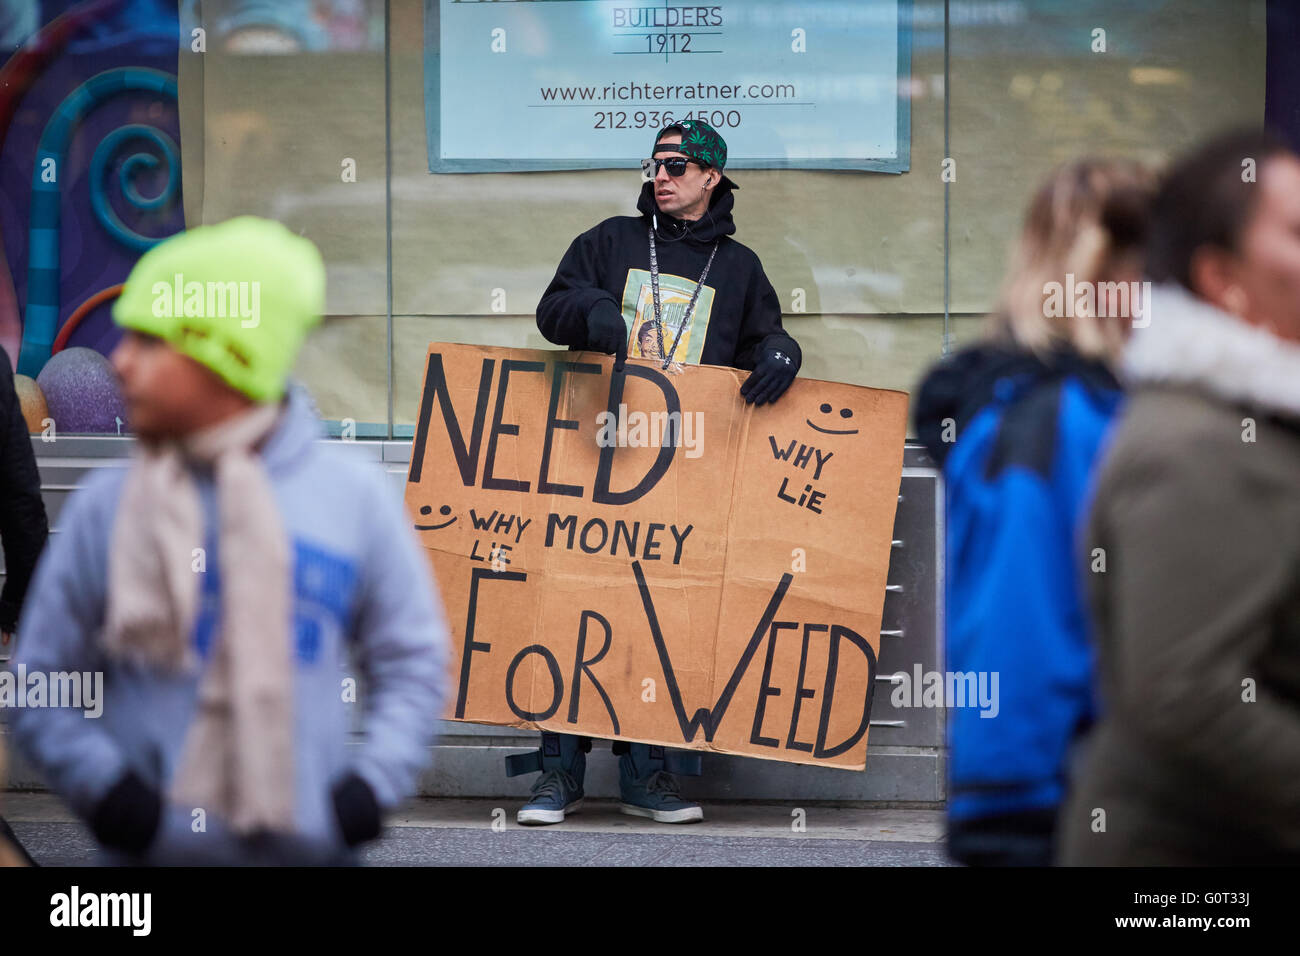 New York times Square   beggar begging wanting money cash hand looking for wanting humour homeless need money for weed sign card Stock Photo